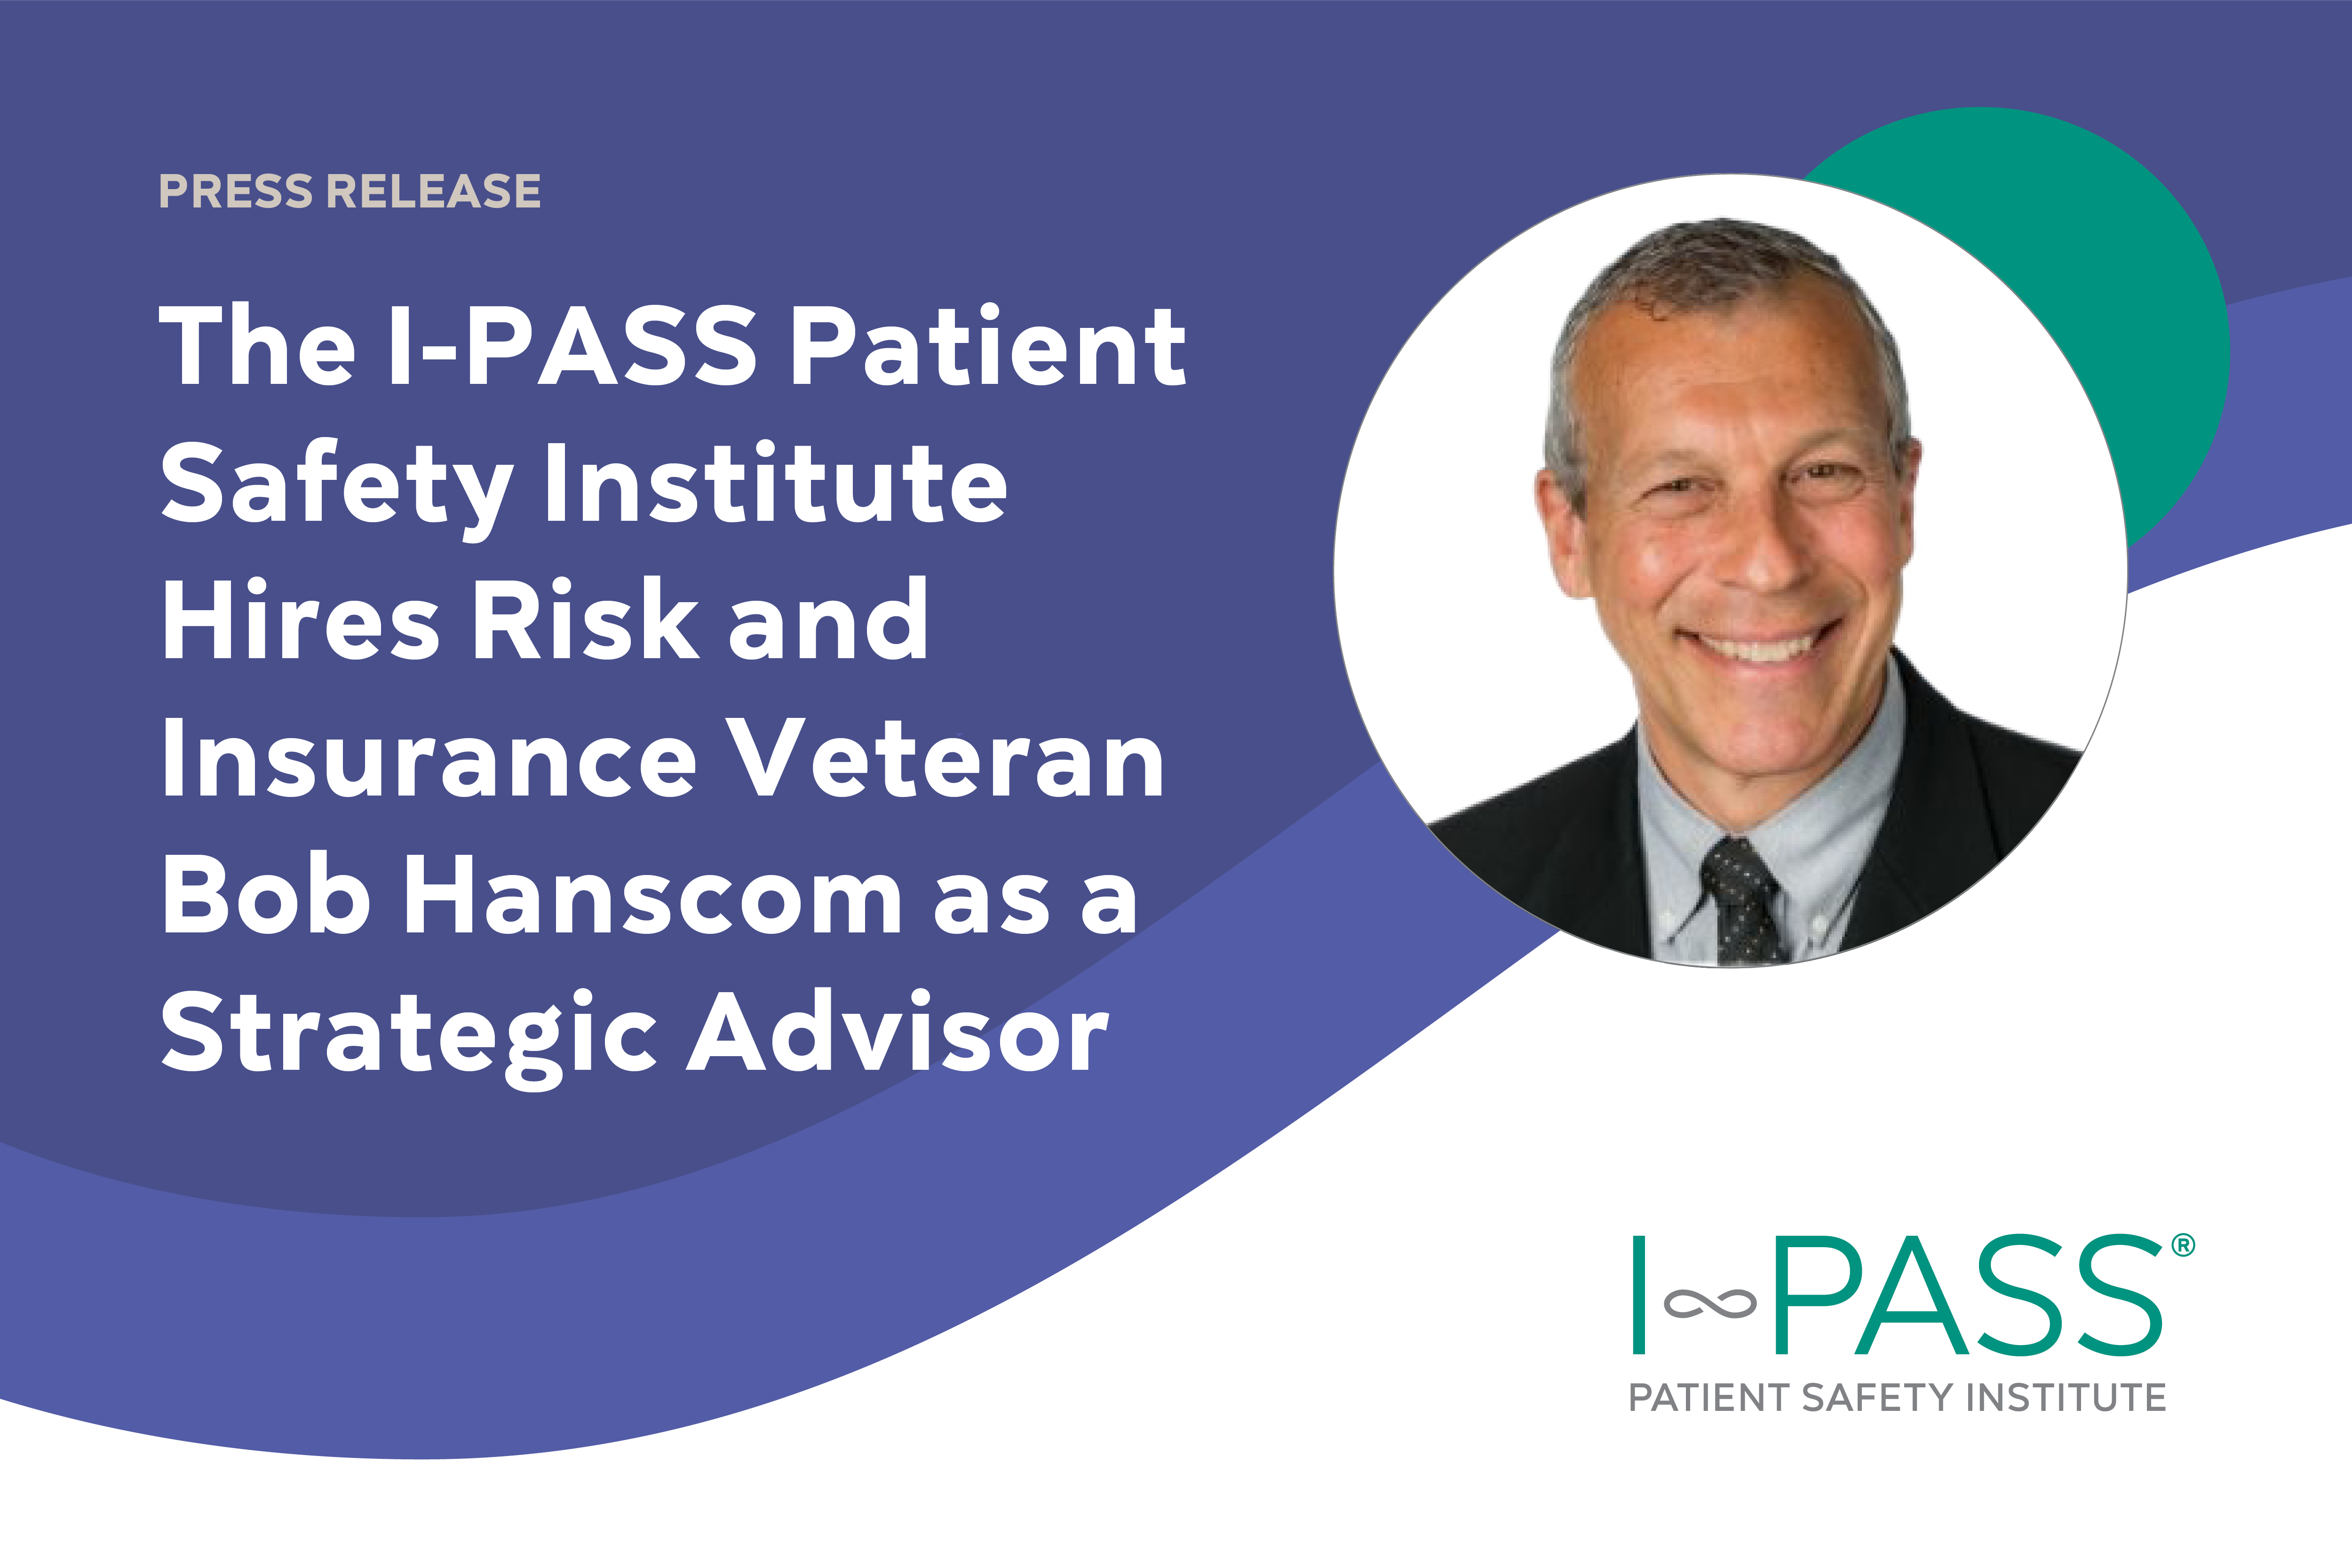 The I-PASS Patient Safety Institute Hires Risk and Insurance Veteran Bob Hanscom as a Strategic Advisor